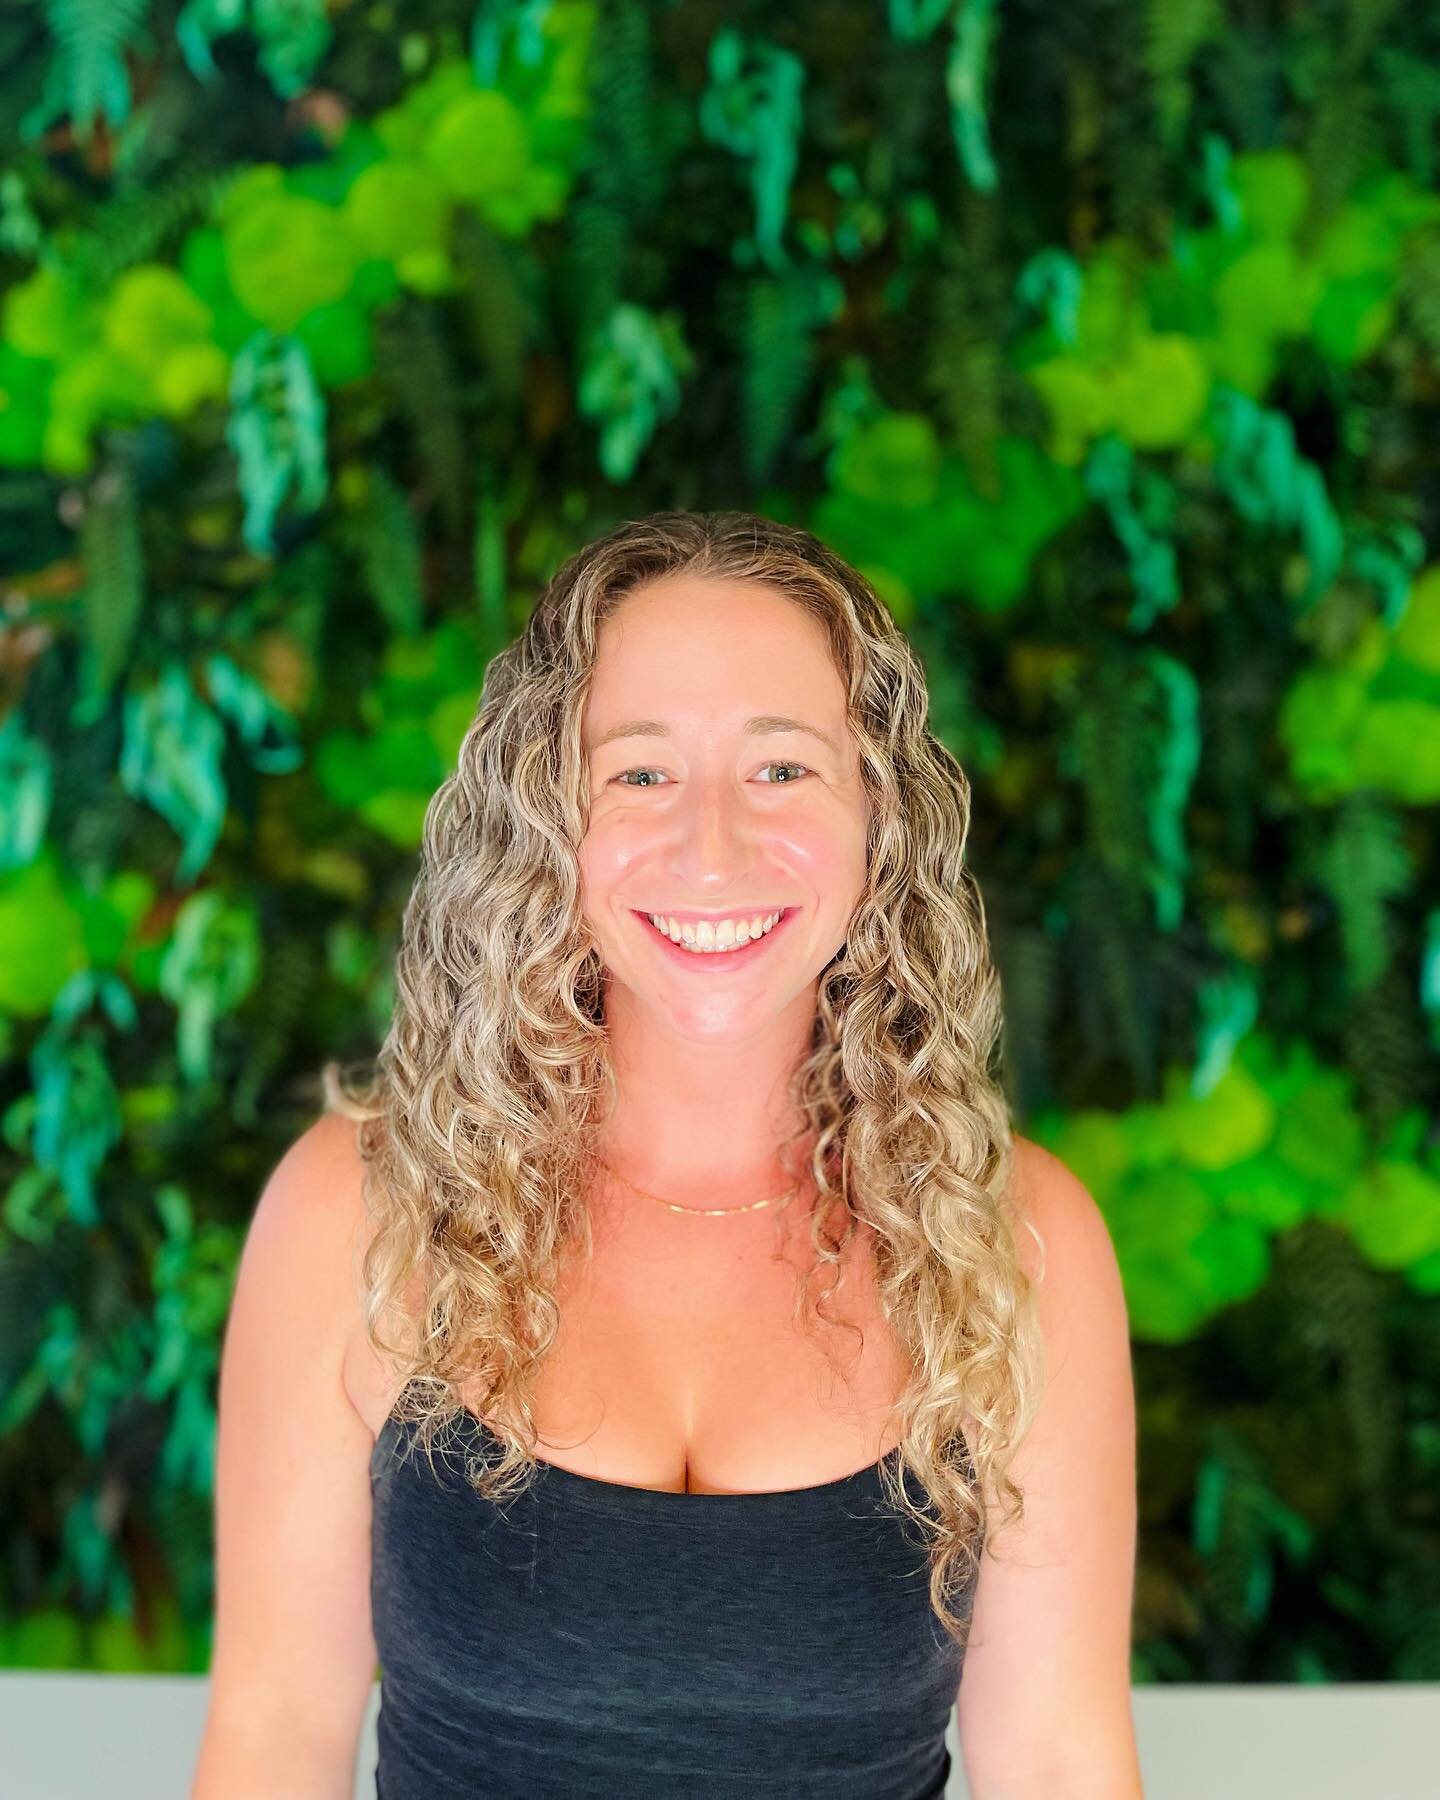 ✨New mental health focused yoga classes and workshops @astute_counseling_wellness in Lakeview! ✨

My yoga journey began with greater awareness of my mental/emotional states and all the parts that make up my internal system. 

Expanding my understandi